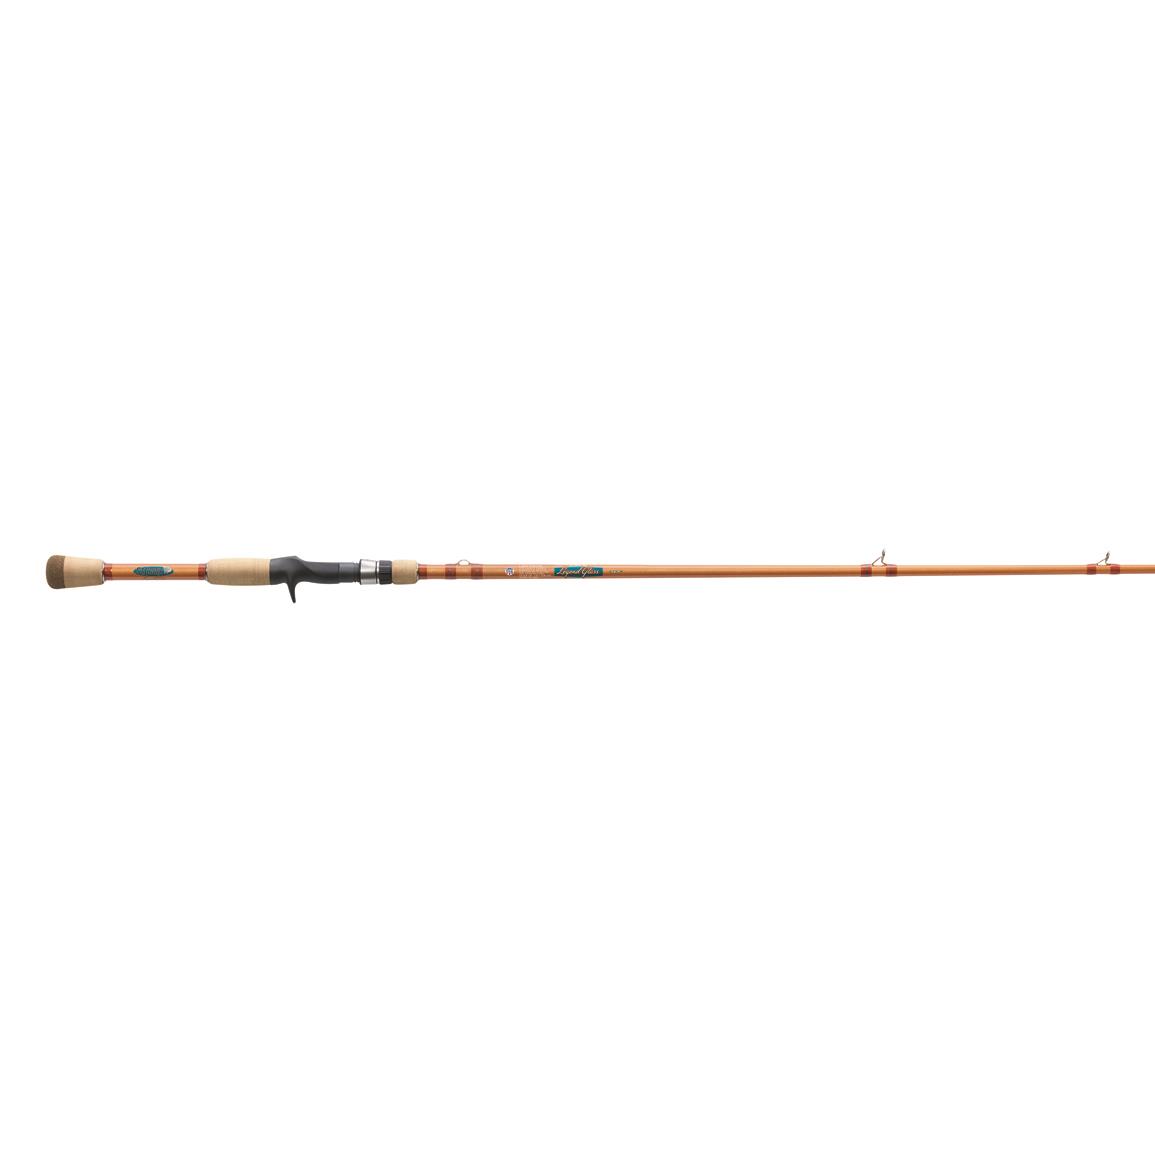 St. Croix Legend Glass Casting Rod, 7'2" Length, Heavy Power, Moderate Action